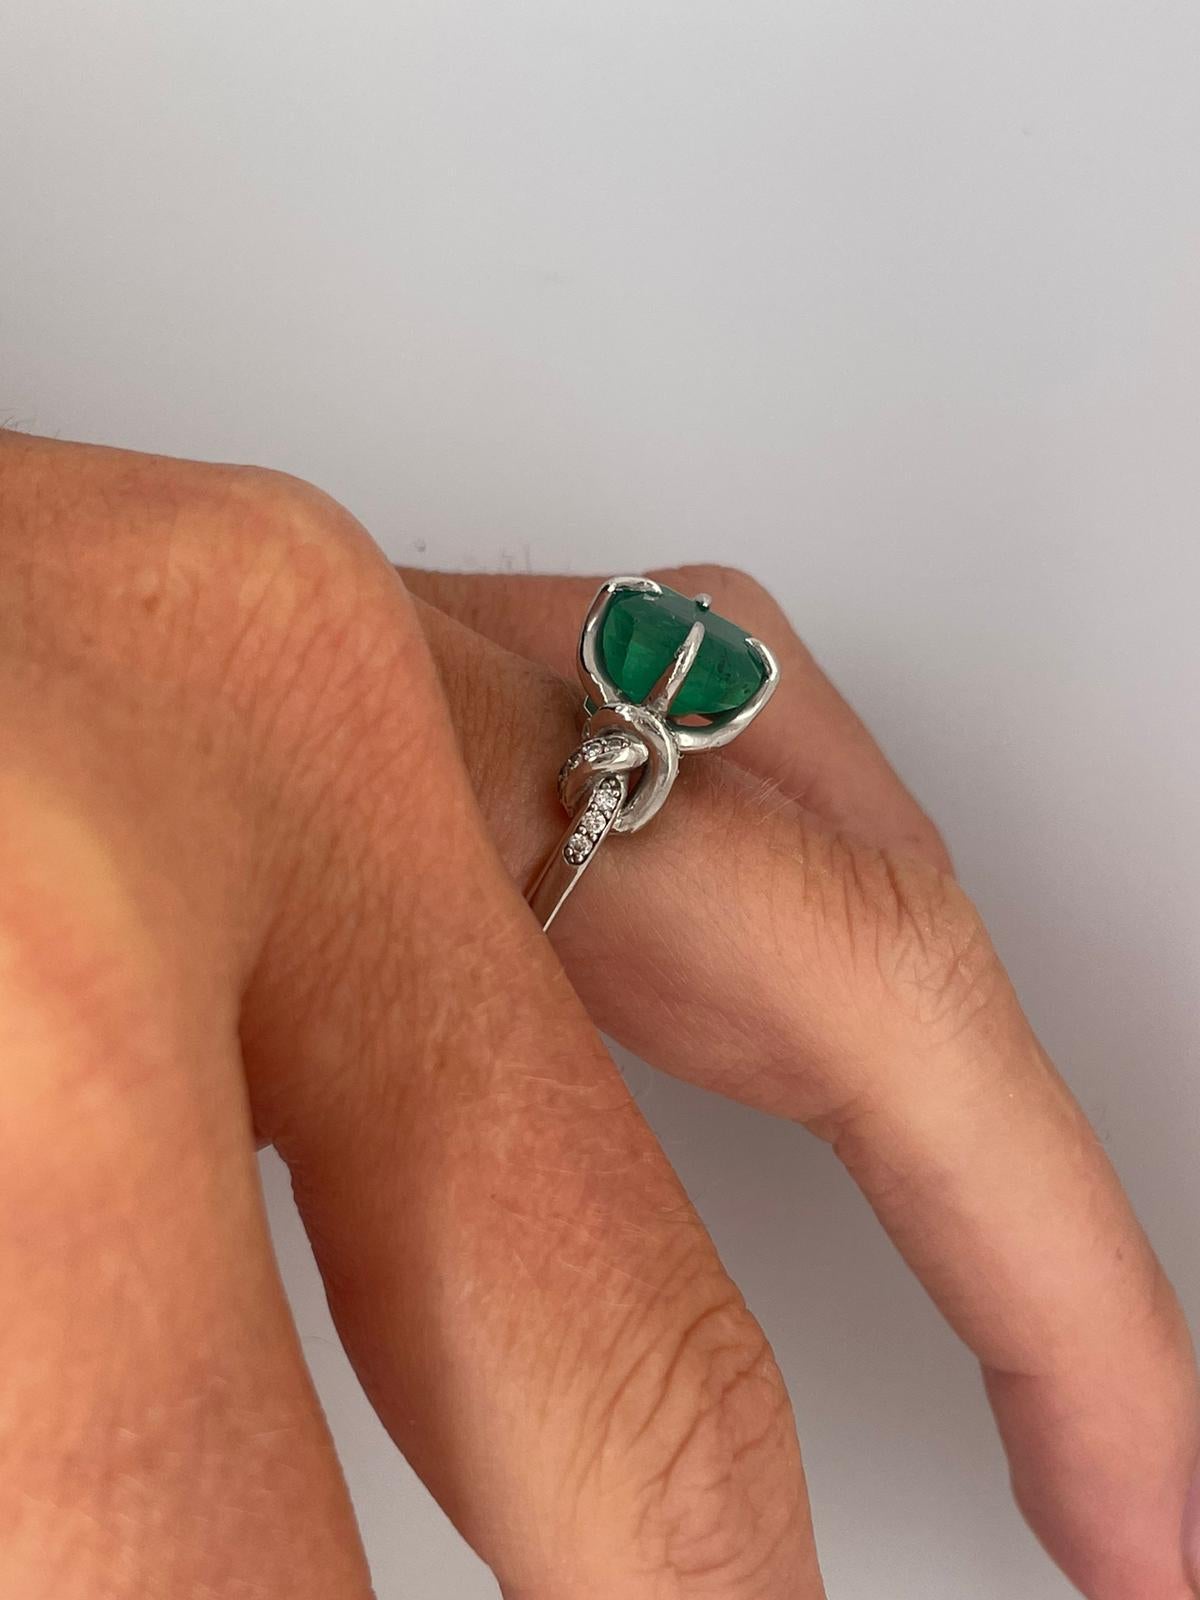 For Sale:  4ct Emerald solitaire in platinum with diamond knots  8